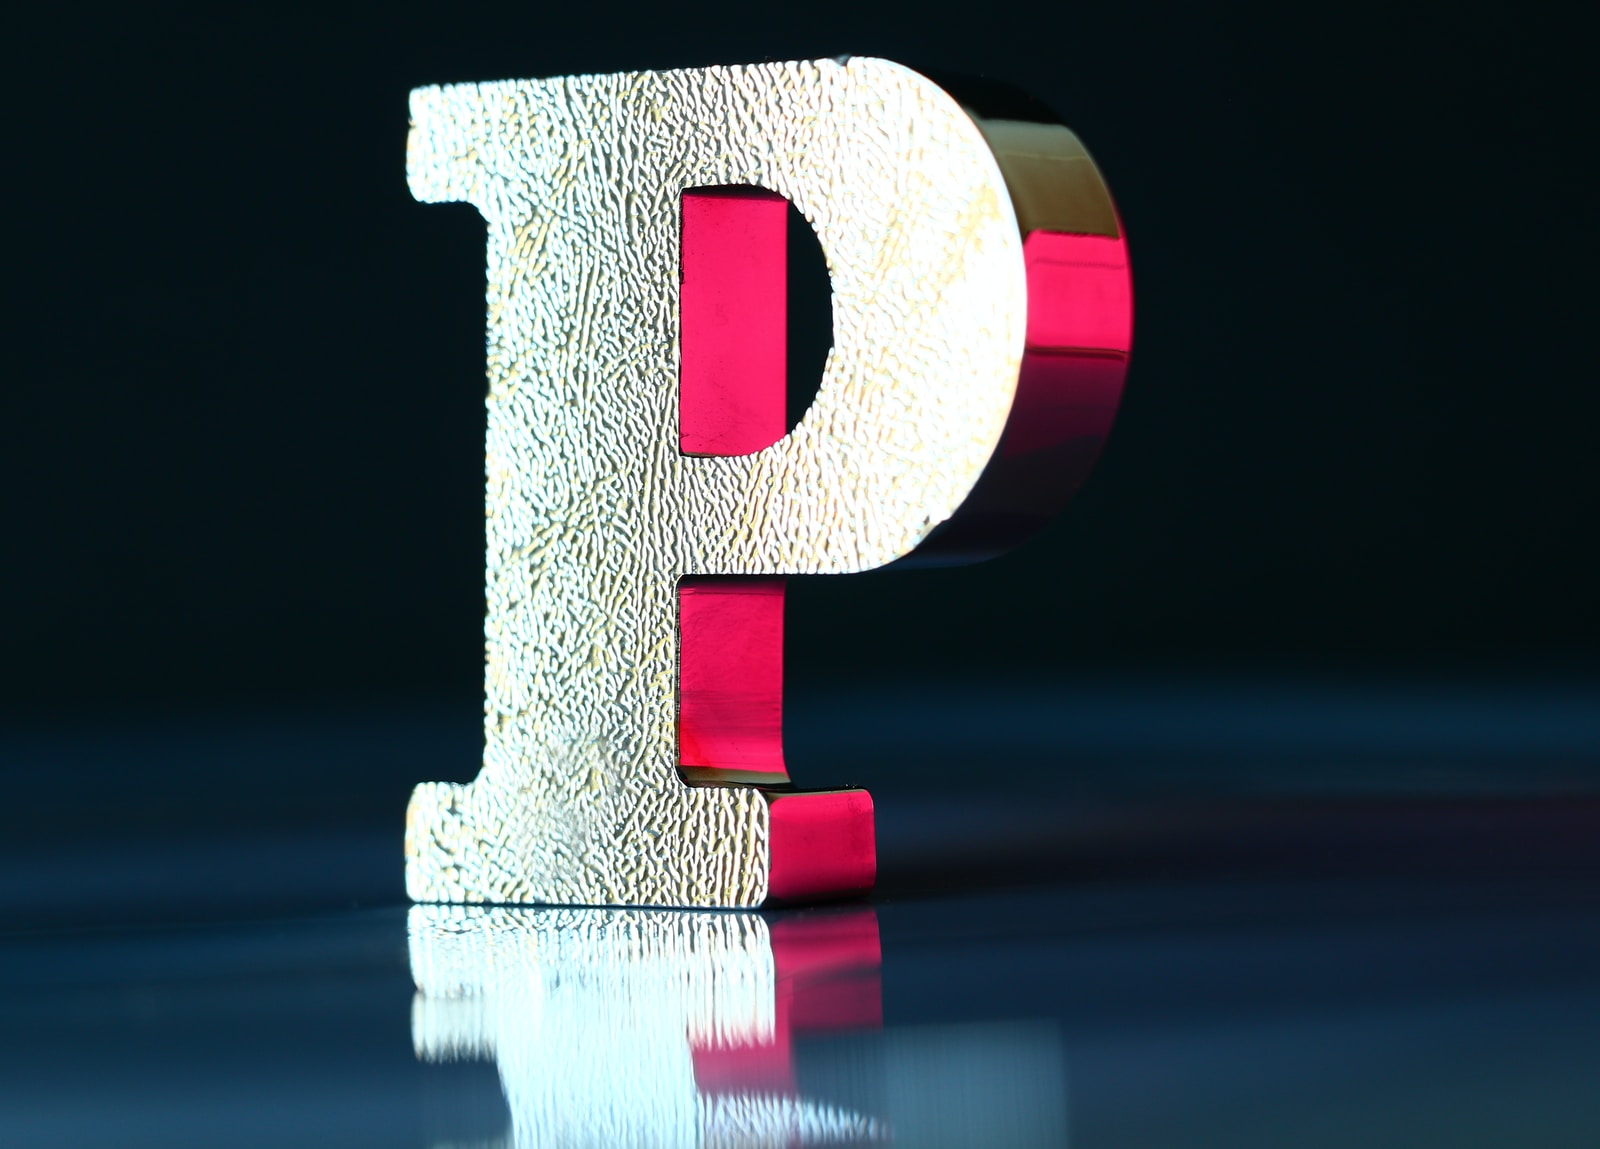 a sculpture of the letter p on a mirrored surface and under a red light